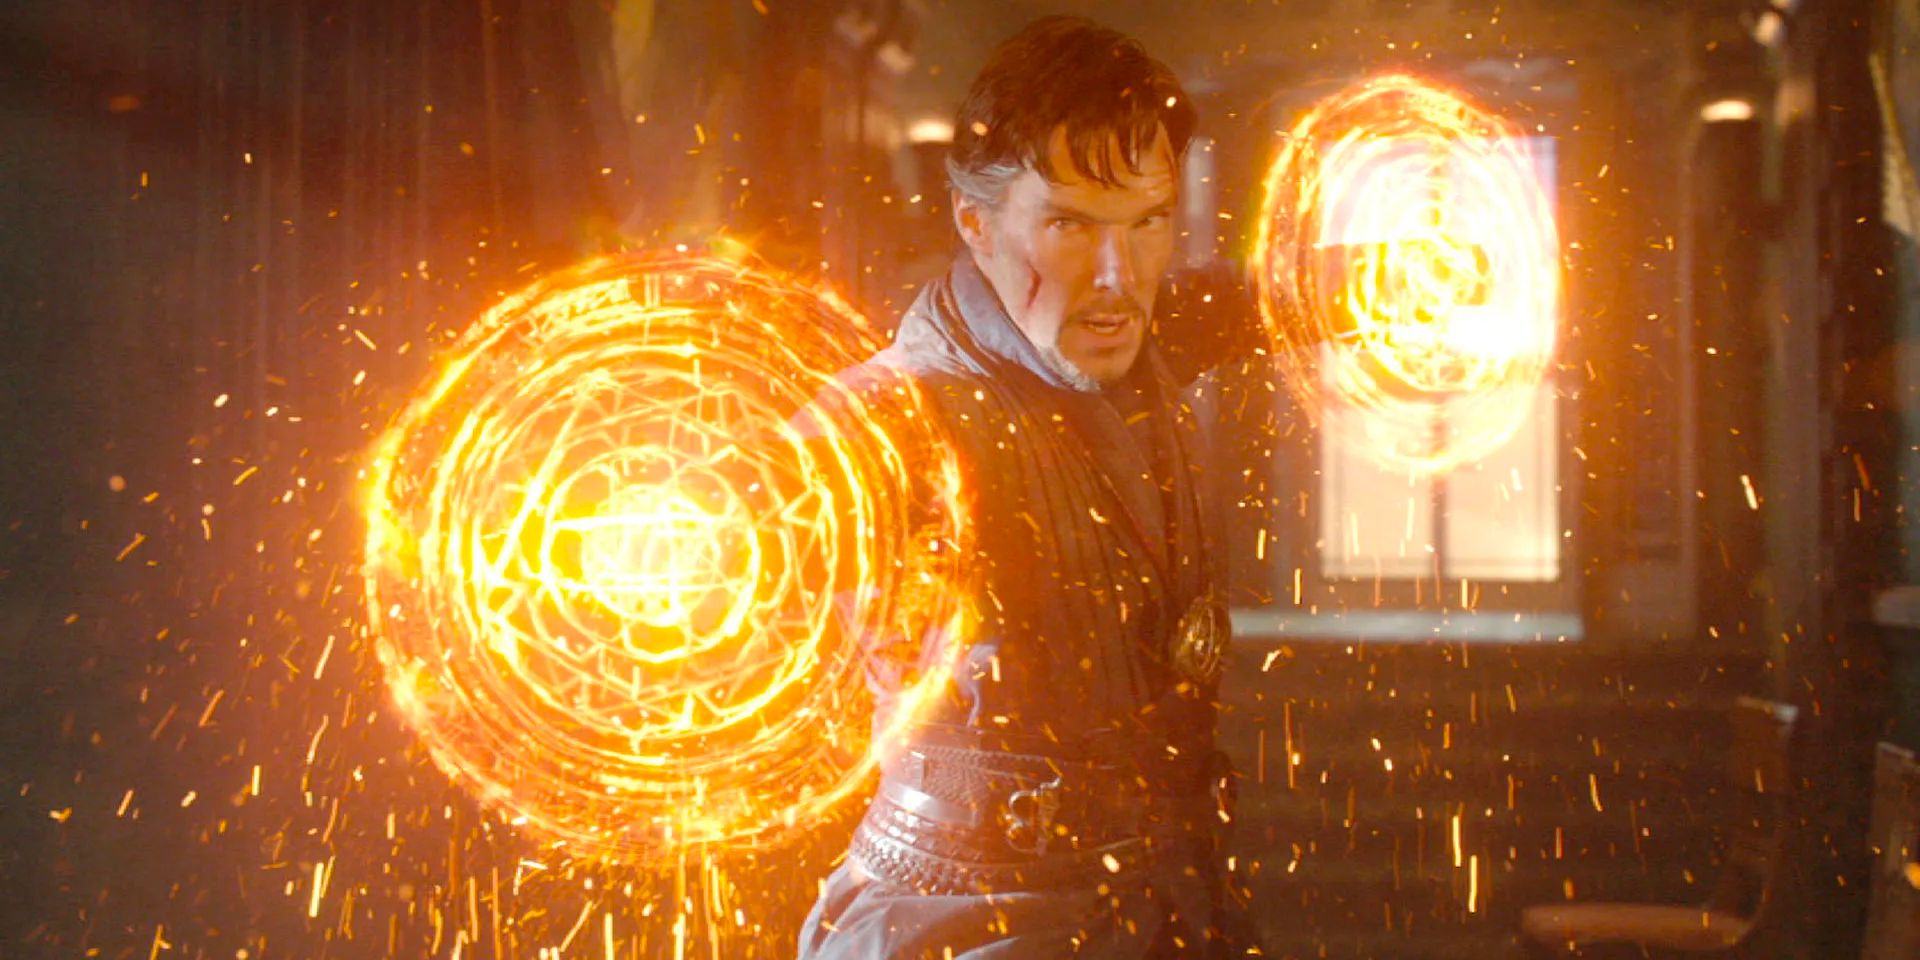 Marvel hero Dr. Strange (Benedict Cumberbatch) casts a spell while in training.